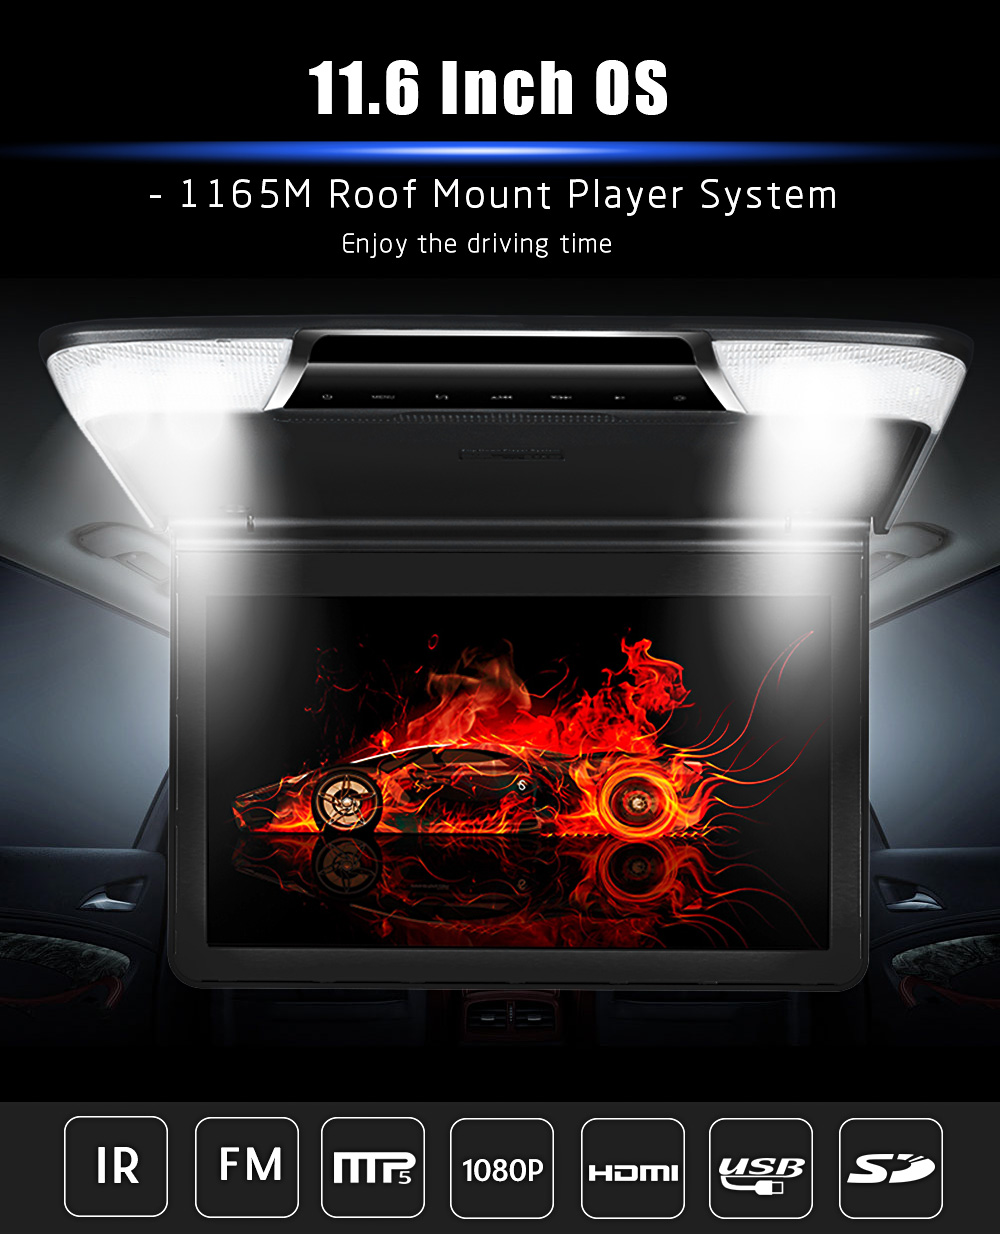 11.6 Inch OS - 1165M Roof Mount Player System with USB IR FM Transmitter HDMI